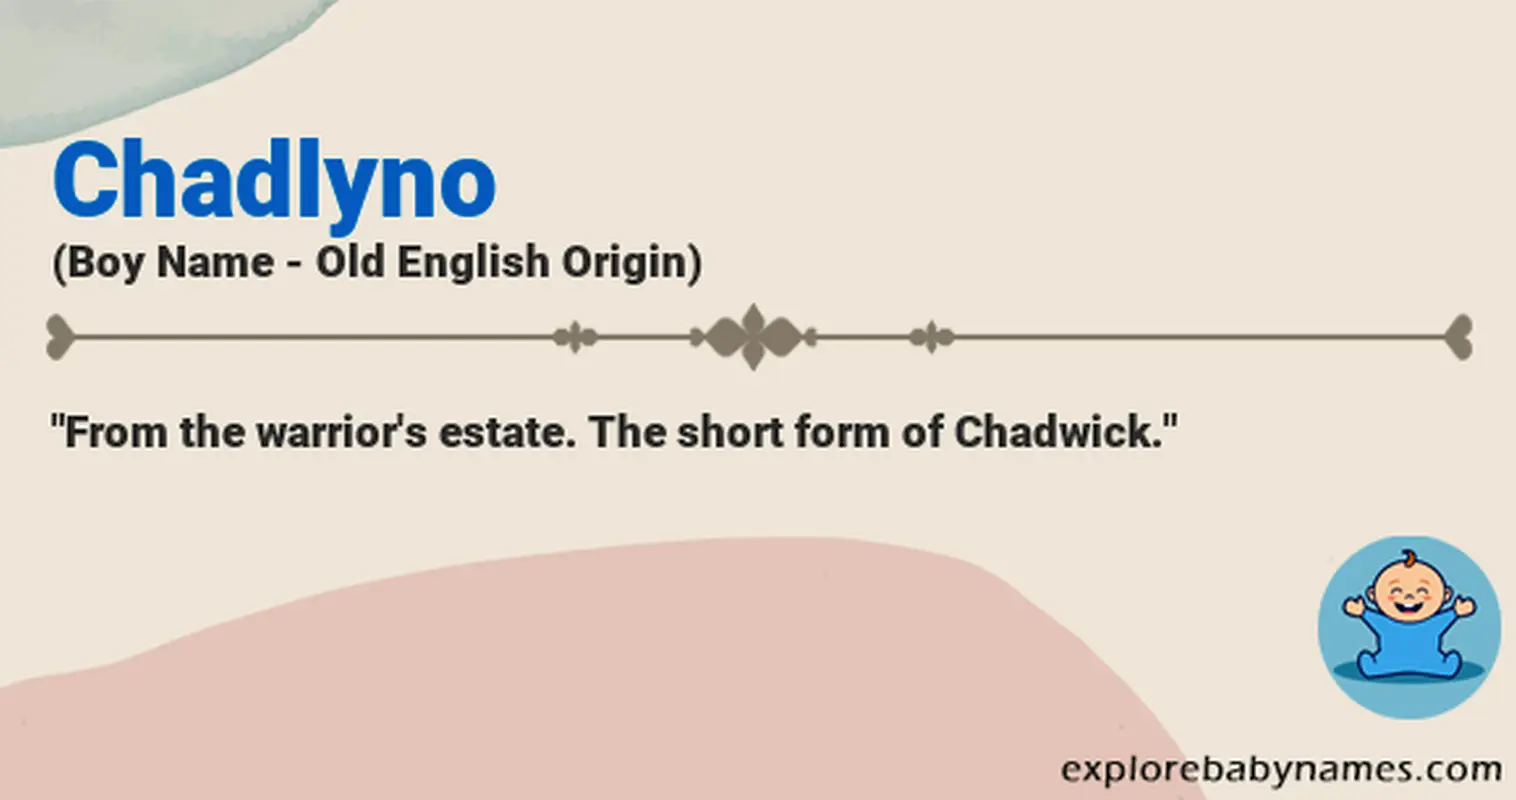 Meaning of Chadlyno